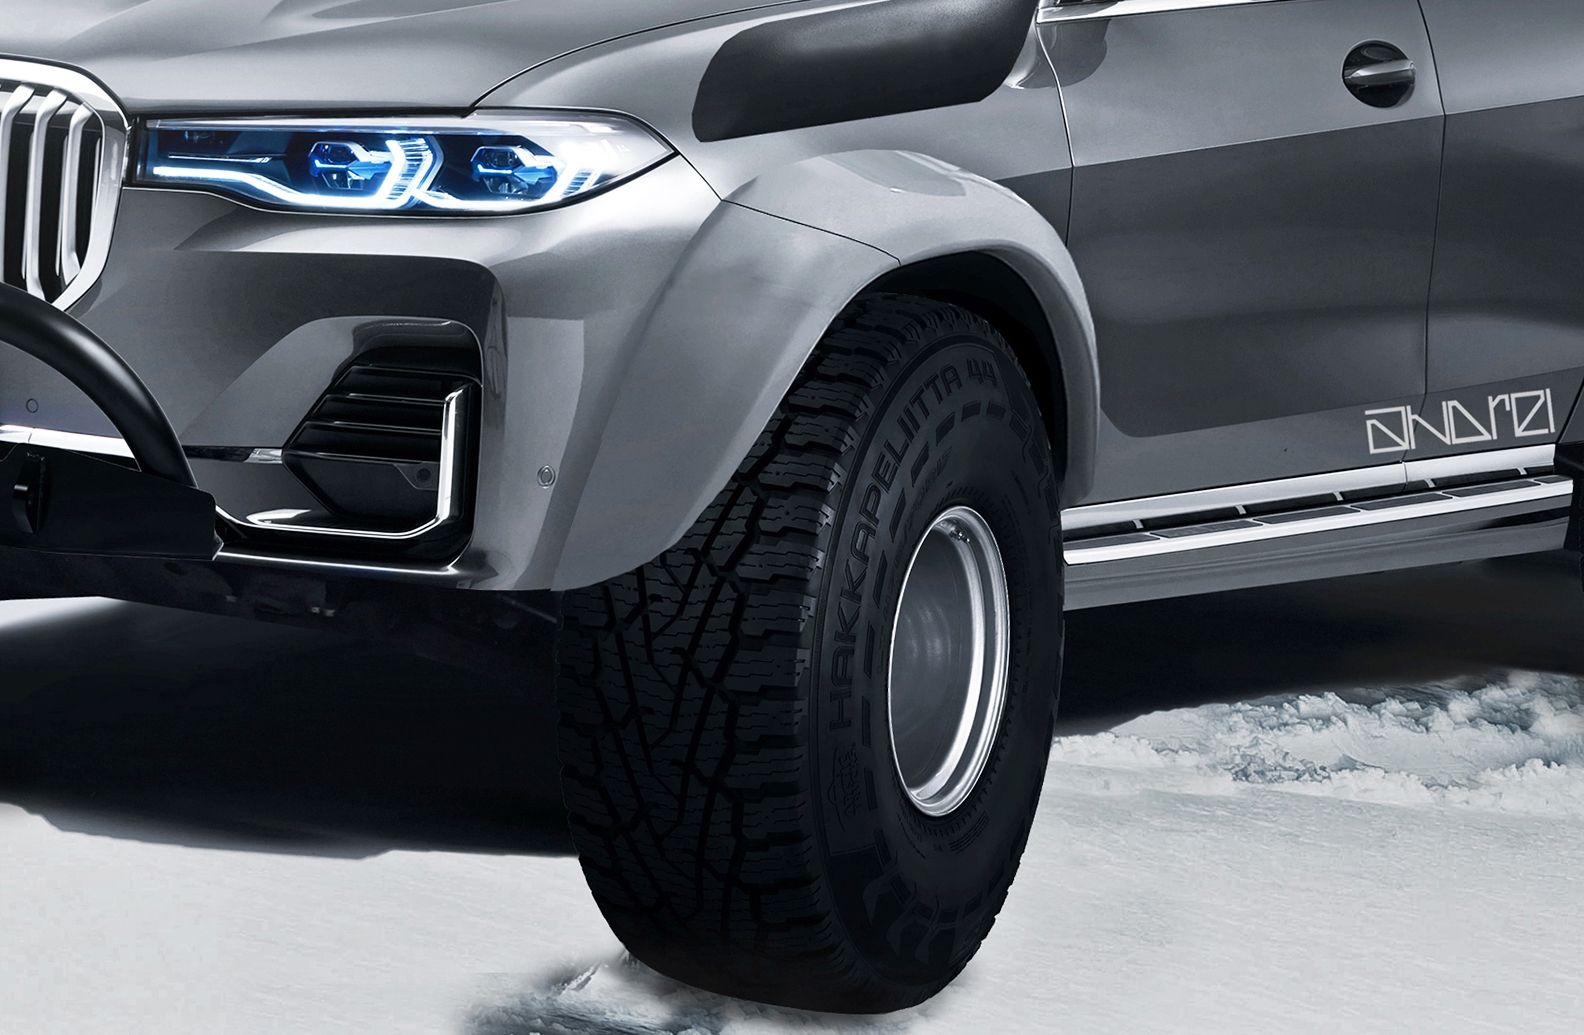 2019 The Arctic Trucks BMW X7 Isn't Real but We Want One